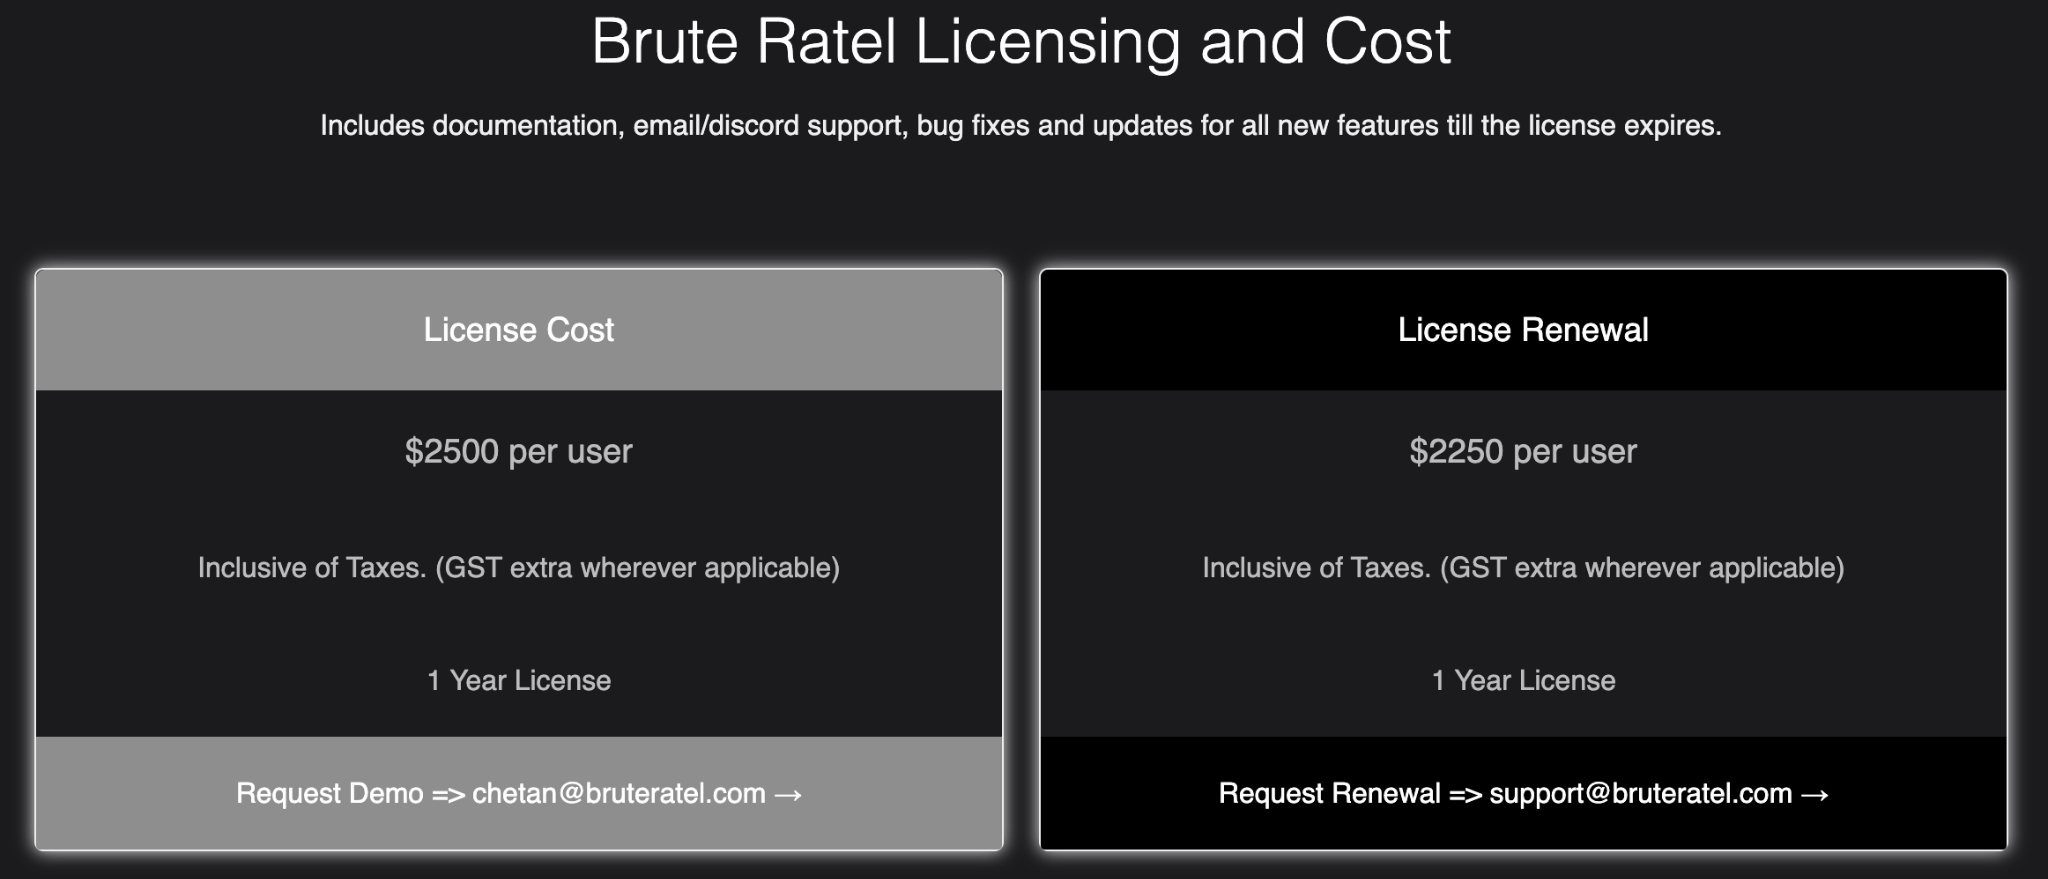 Brute Ratel Licensing and Cost - Includes documentation, email/discord support, bug fixes and updates for all new features till the license expires. License Cost: $2500 per user. Inclusive of taxes (GST extra wherever applies) 1 year license. Request Demo at [email address]. License Renewal: $2250 per user, inclusive of taxes, etc. 